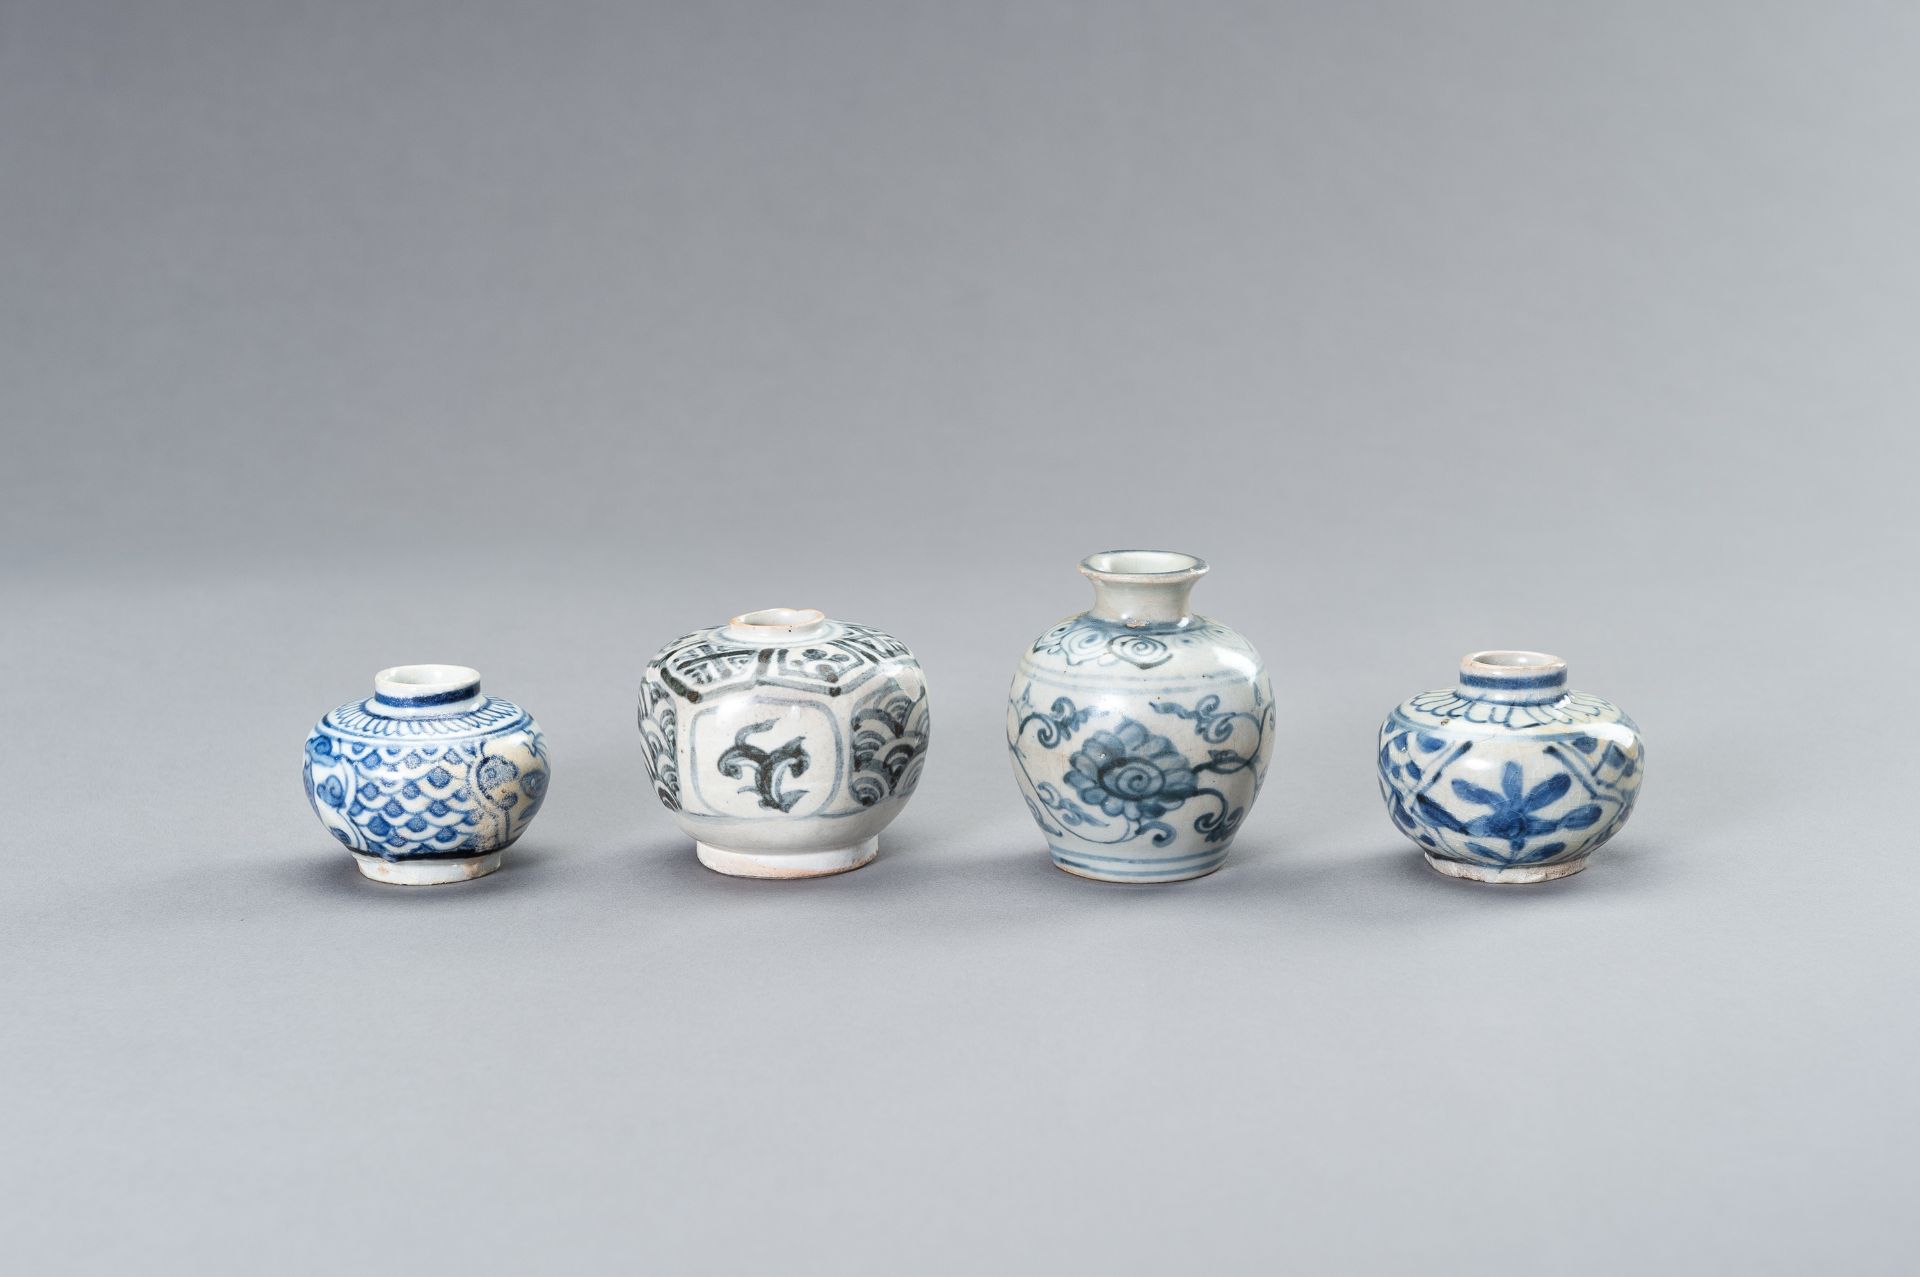 FOUR SMALL BLUE AND WHITE CERAMIC JARS - Image 4 of 8